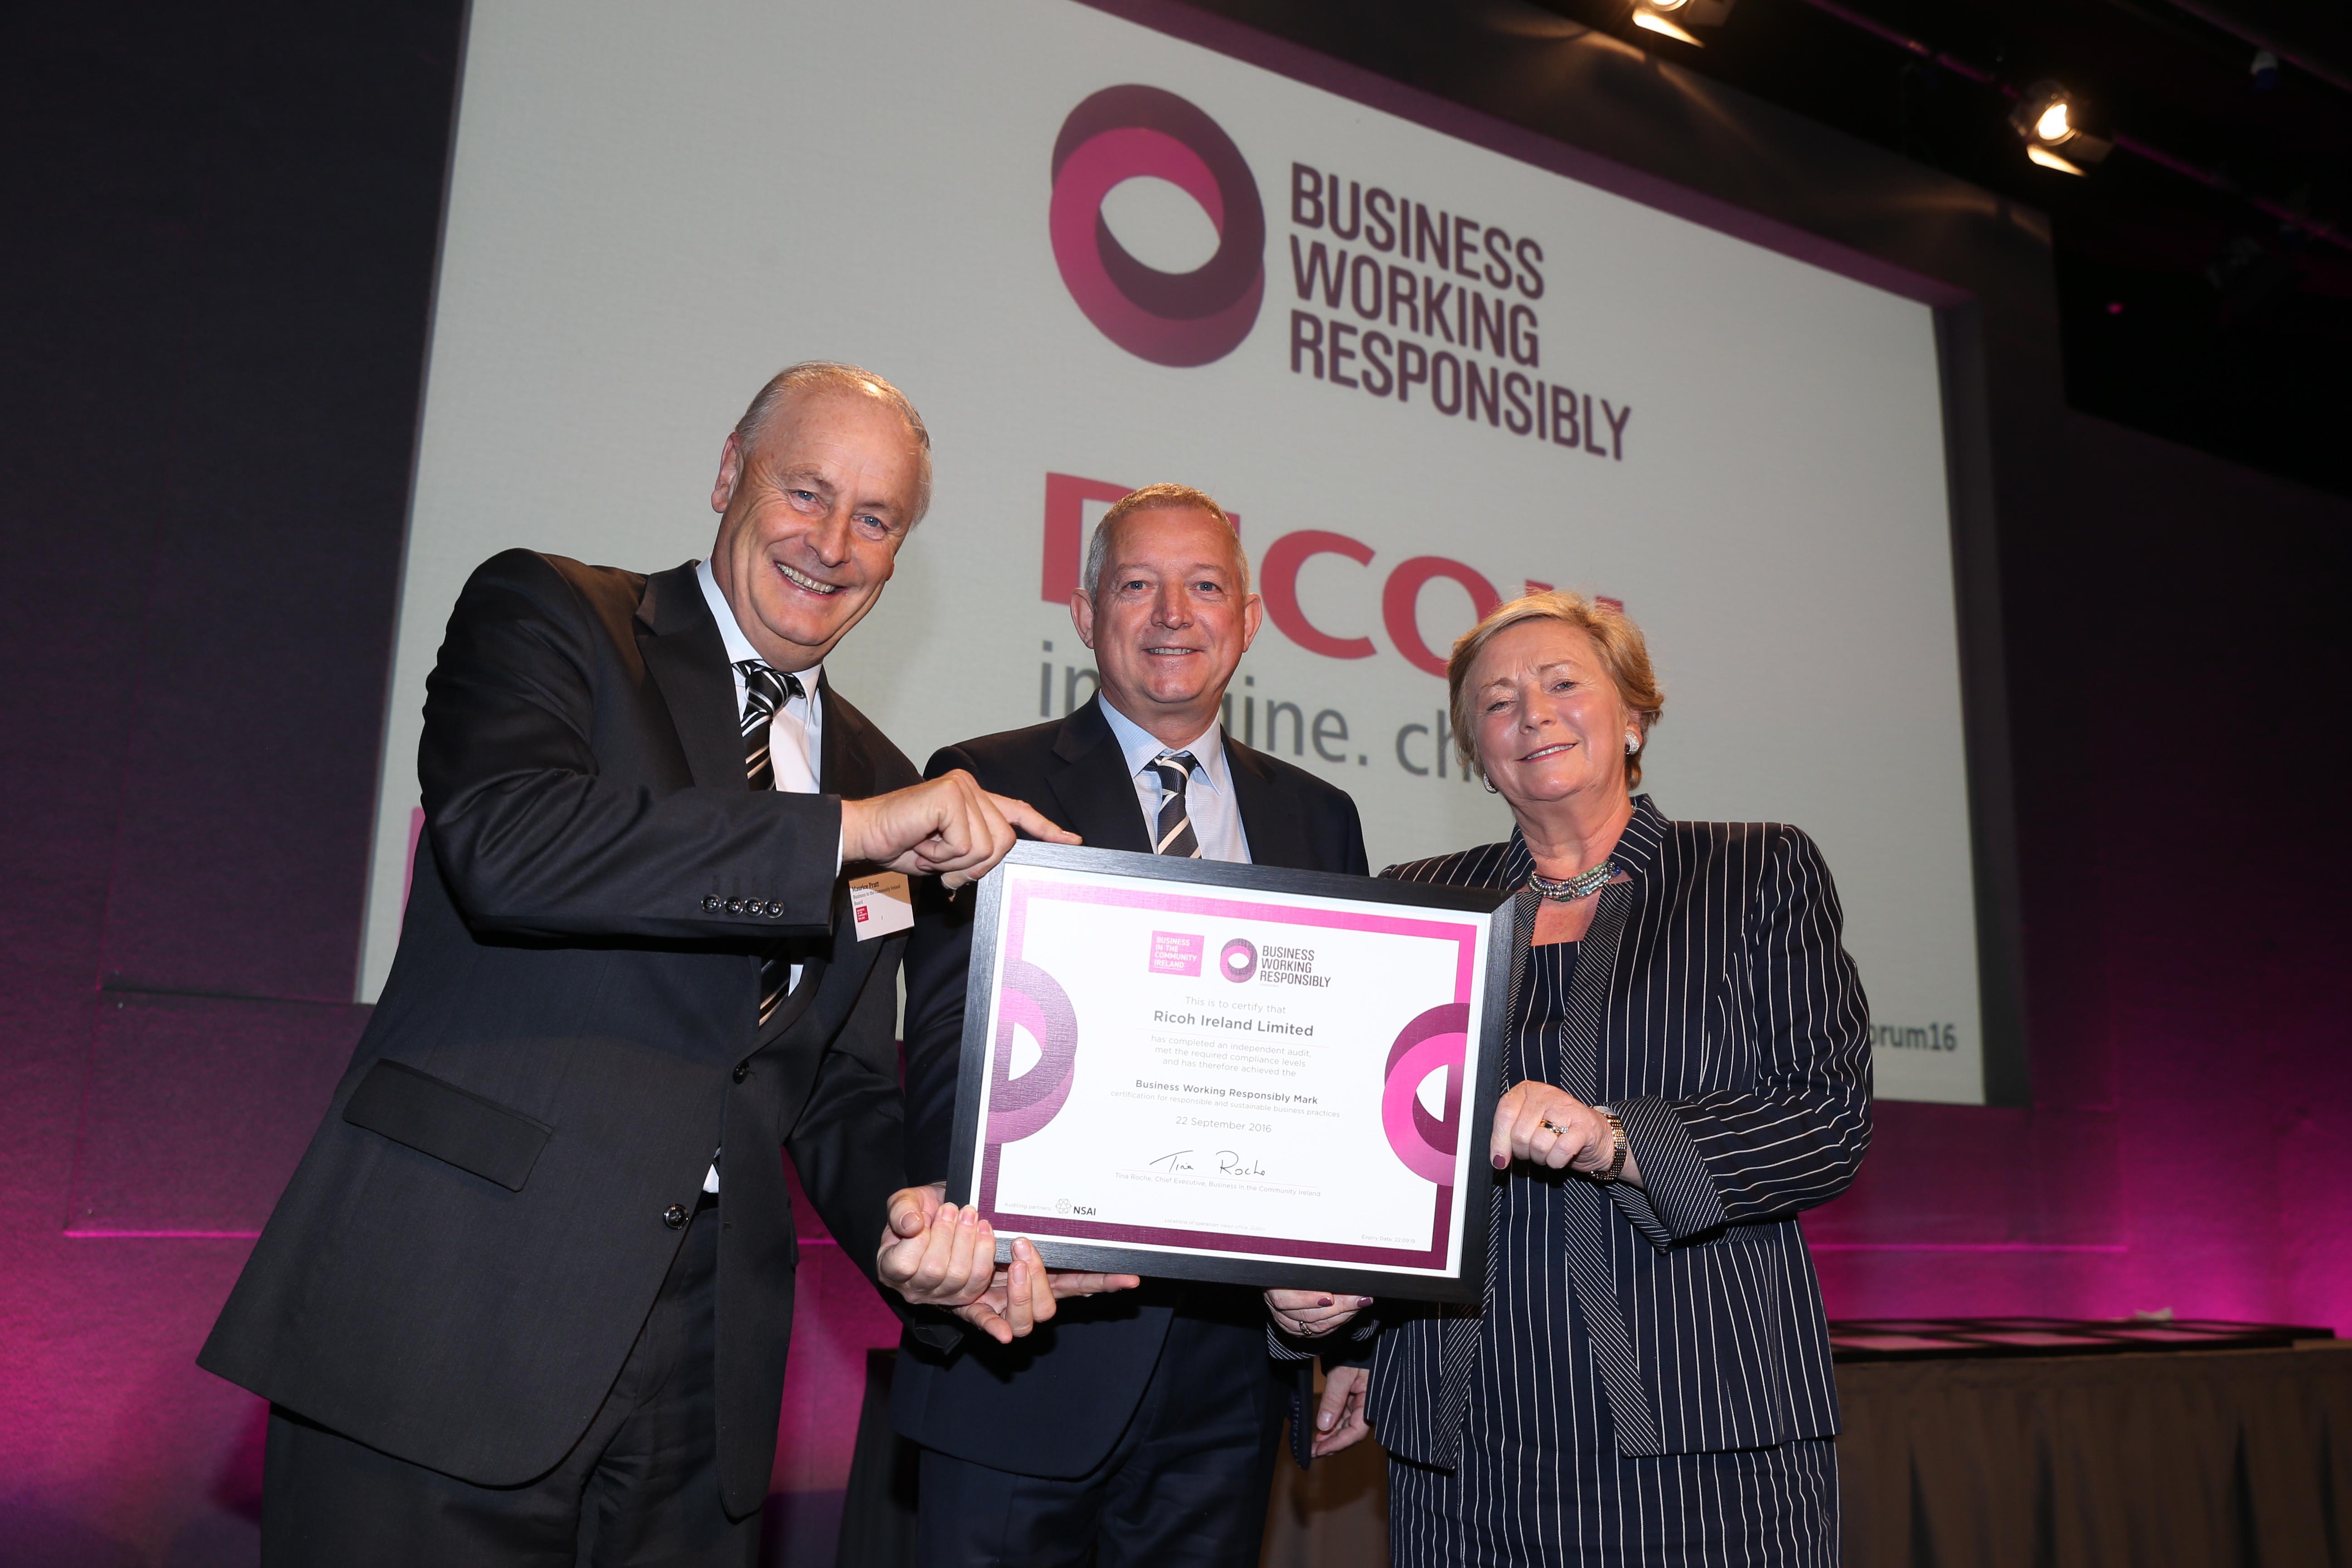 Ricoh Ireland Receives Business Working Responsibly Mark for a Second Time